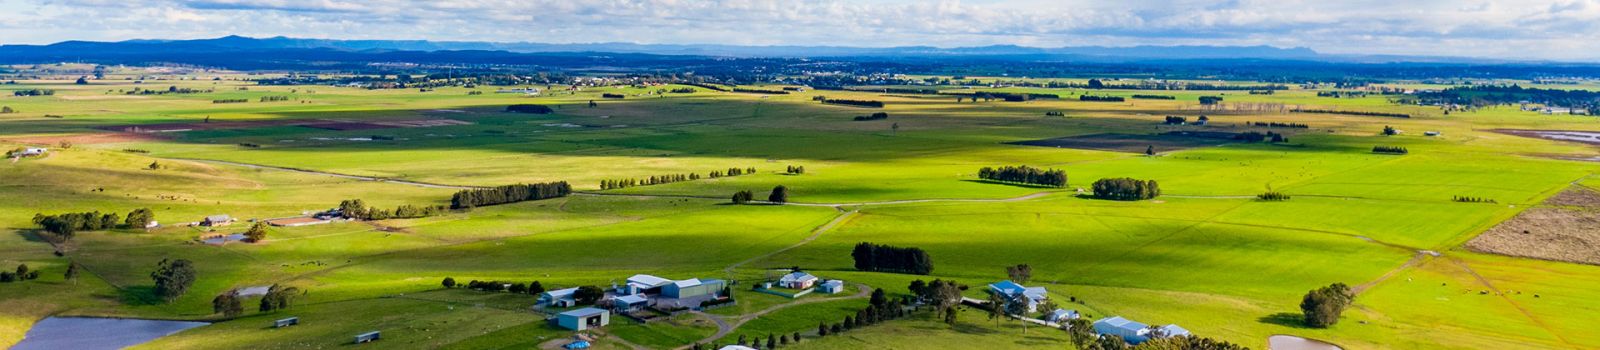 Photograph looking out over paddocks and a river banner image